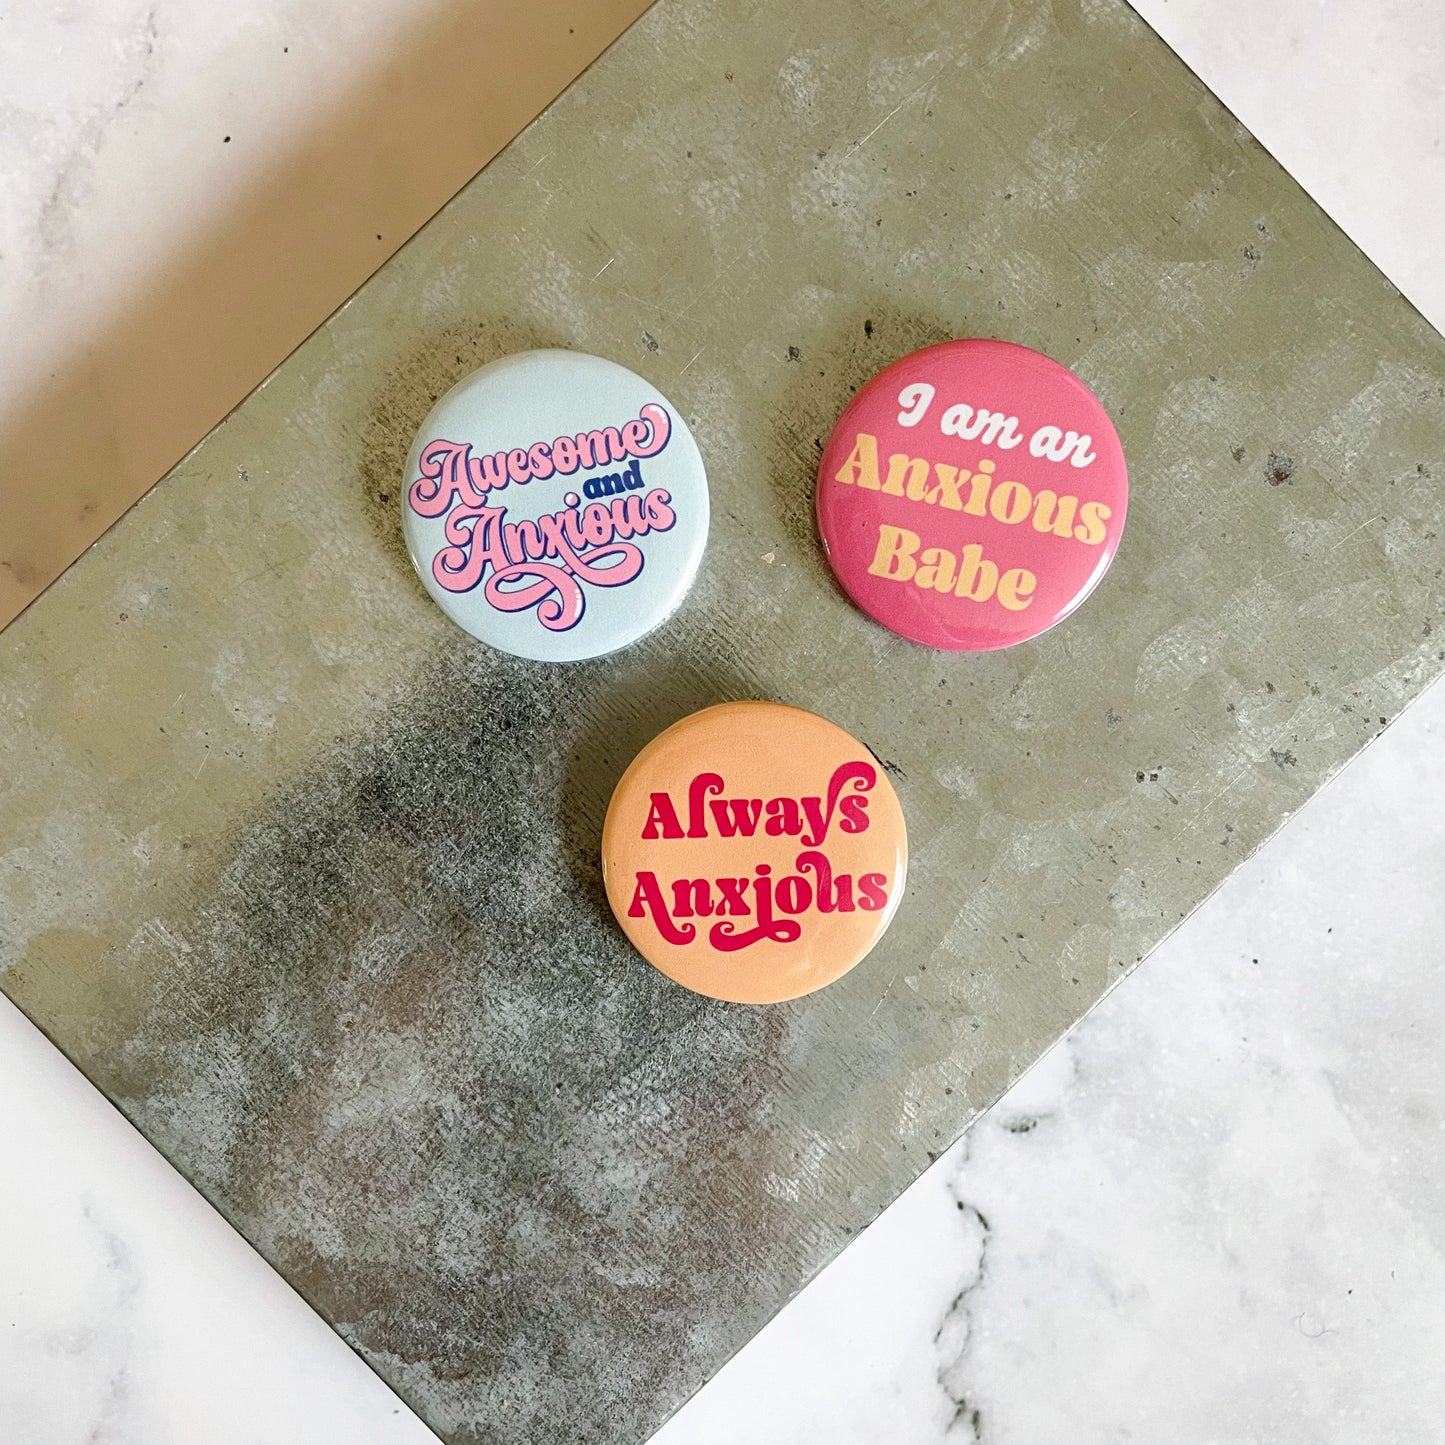 I'm and Anxious Babe Button / Badge (Buy 4 Get 1 FREE)